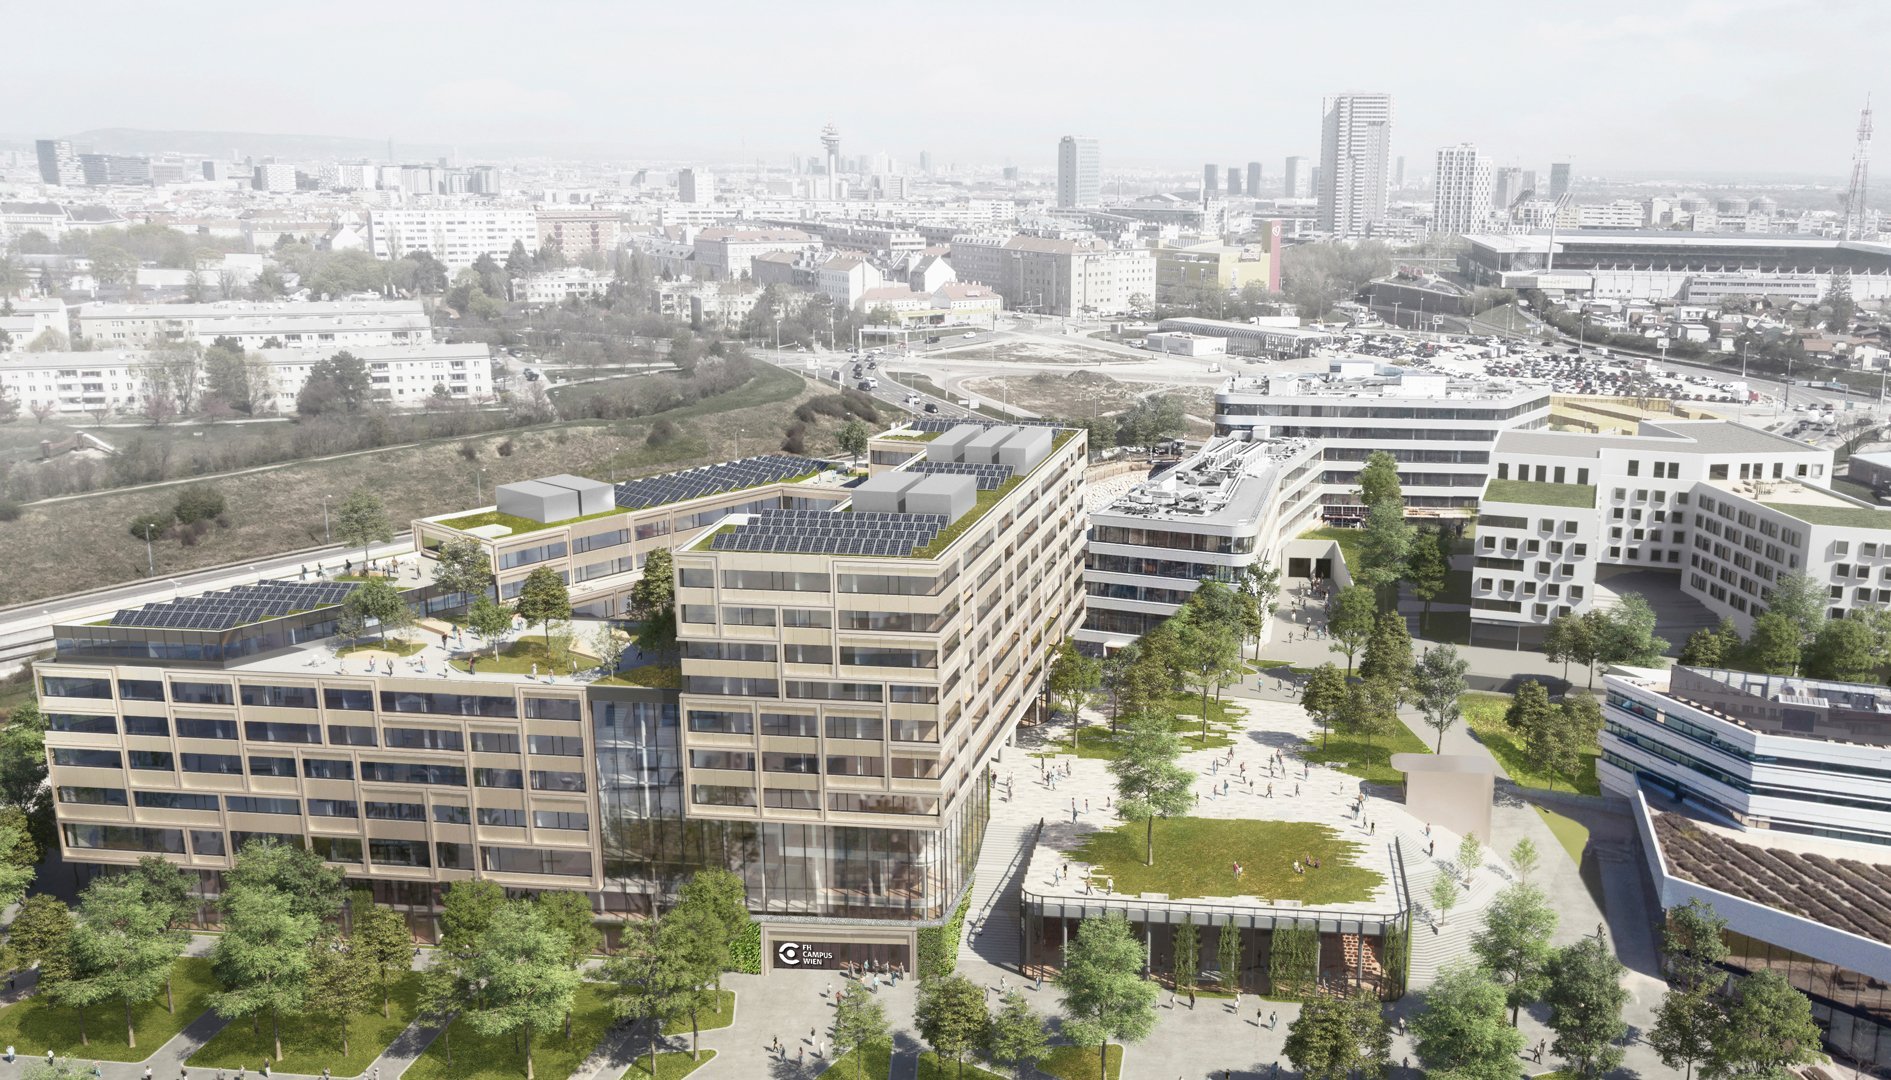 FH Campus - House of Health Sciences Visualisierung